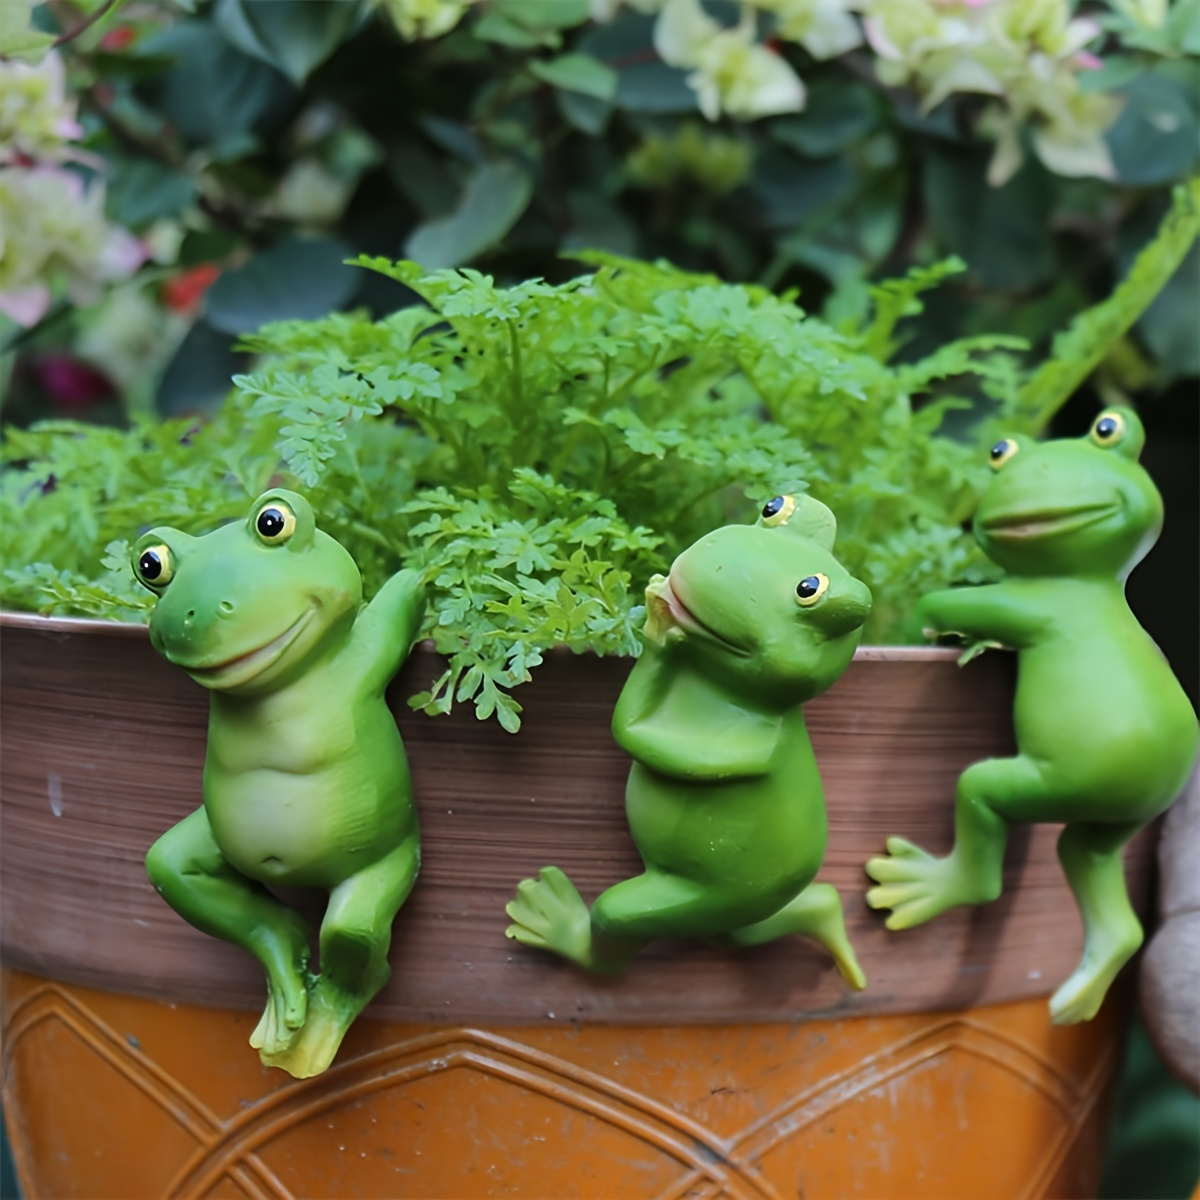 

3pcs/set Cute Frog Figurines: Add Fun & Whimsy To Your Patio, Lawn, Or House With These Hanging Animal Statues!